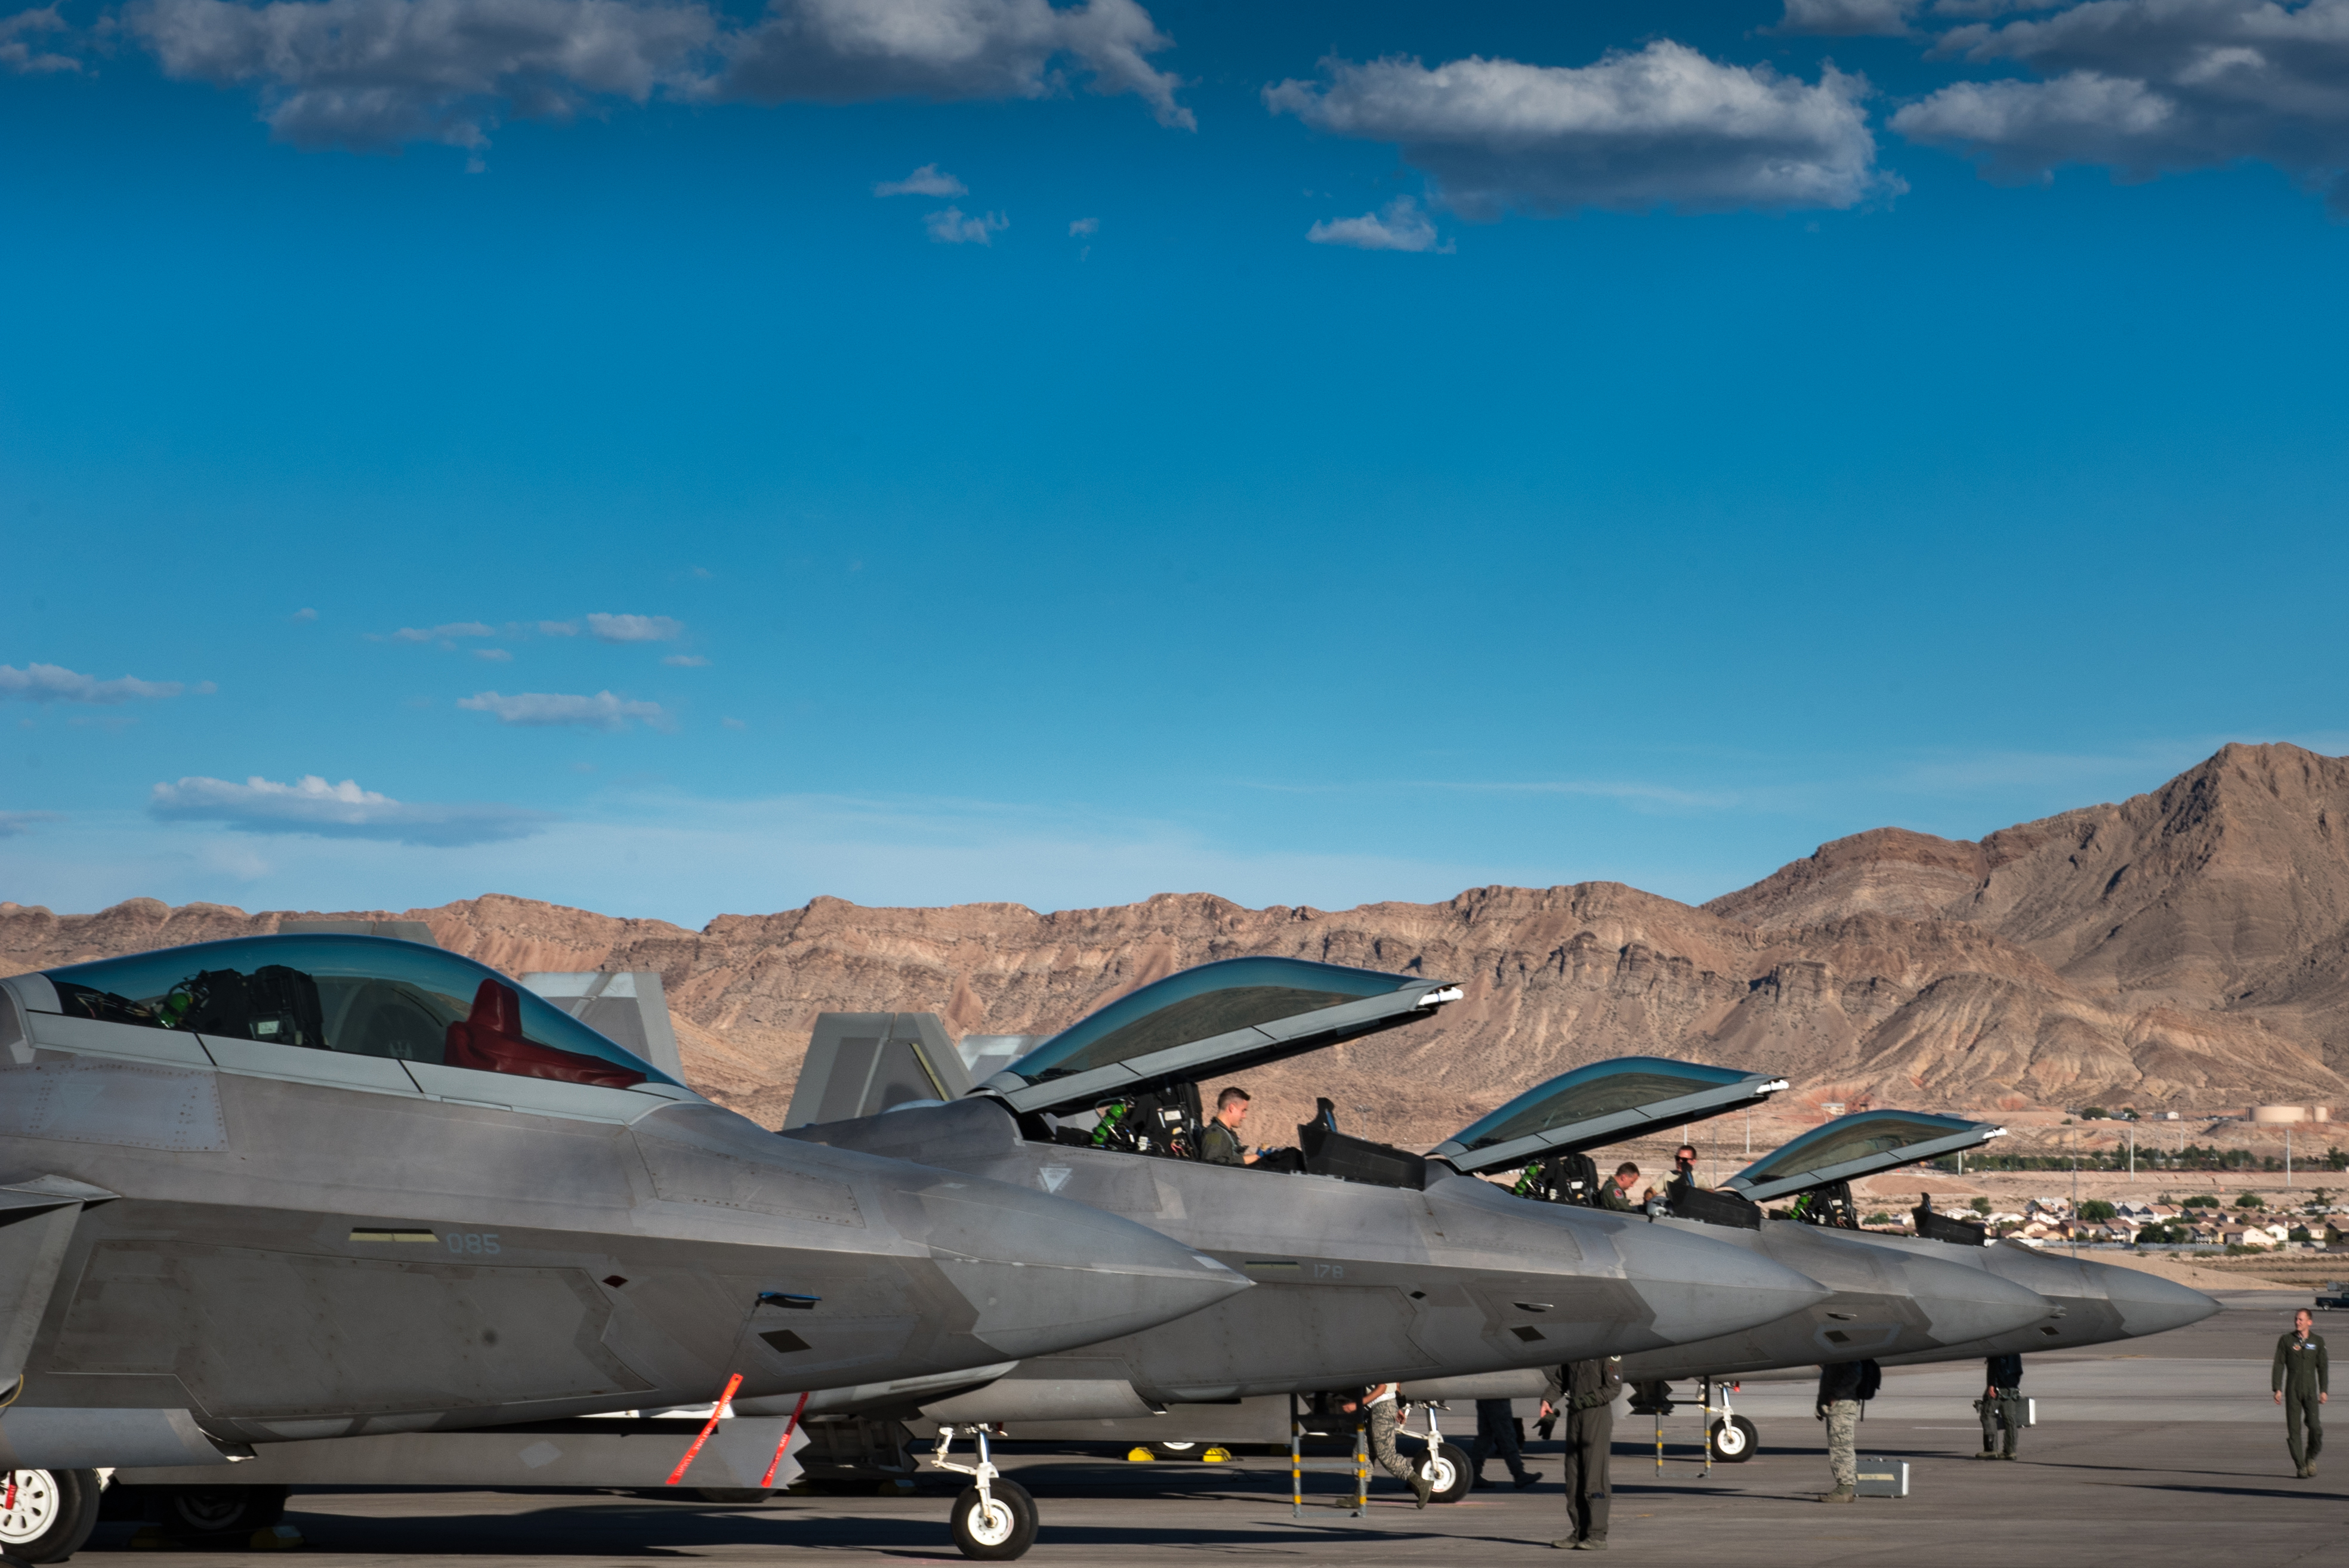 F-22 Raptors assigned to the 94th Fighter Squadron landed at Nellis Air Force Base by U.S. Department of Defense Current Photos